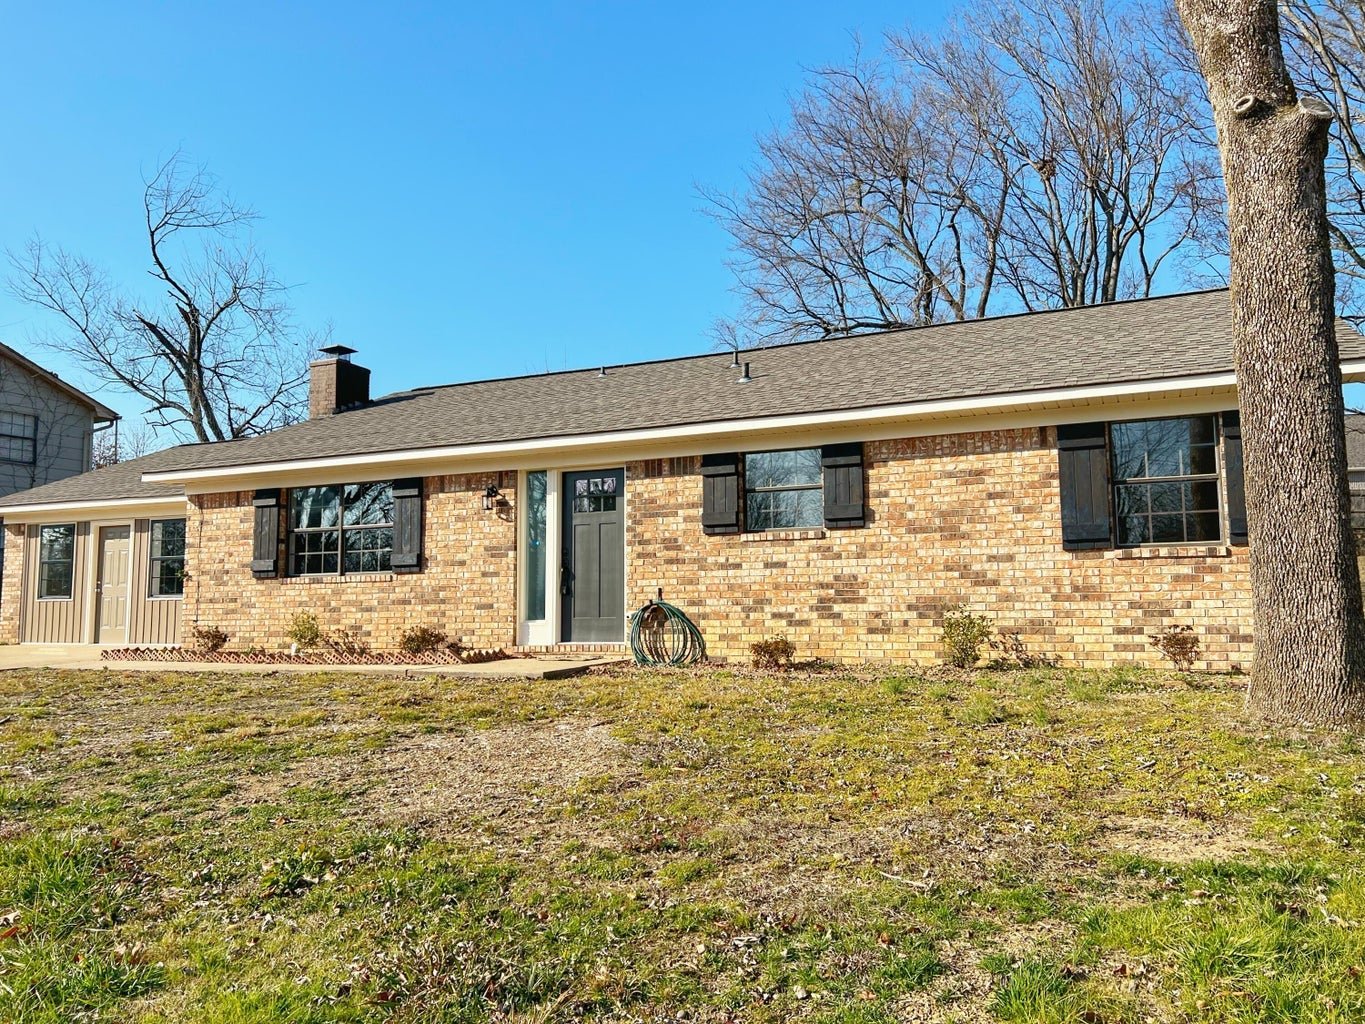 Discover  1918 University Drive! 
This beautifully remodeled Russellville home has been fully updated from floor to ceiling, it feels like a brand-new dwelling!
The heart of the home is an open living, kitchen, and dining area featuring chic granite 